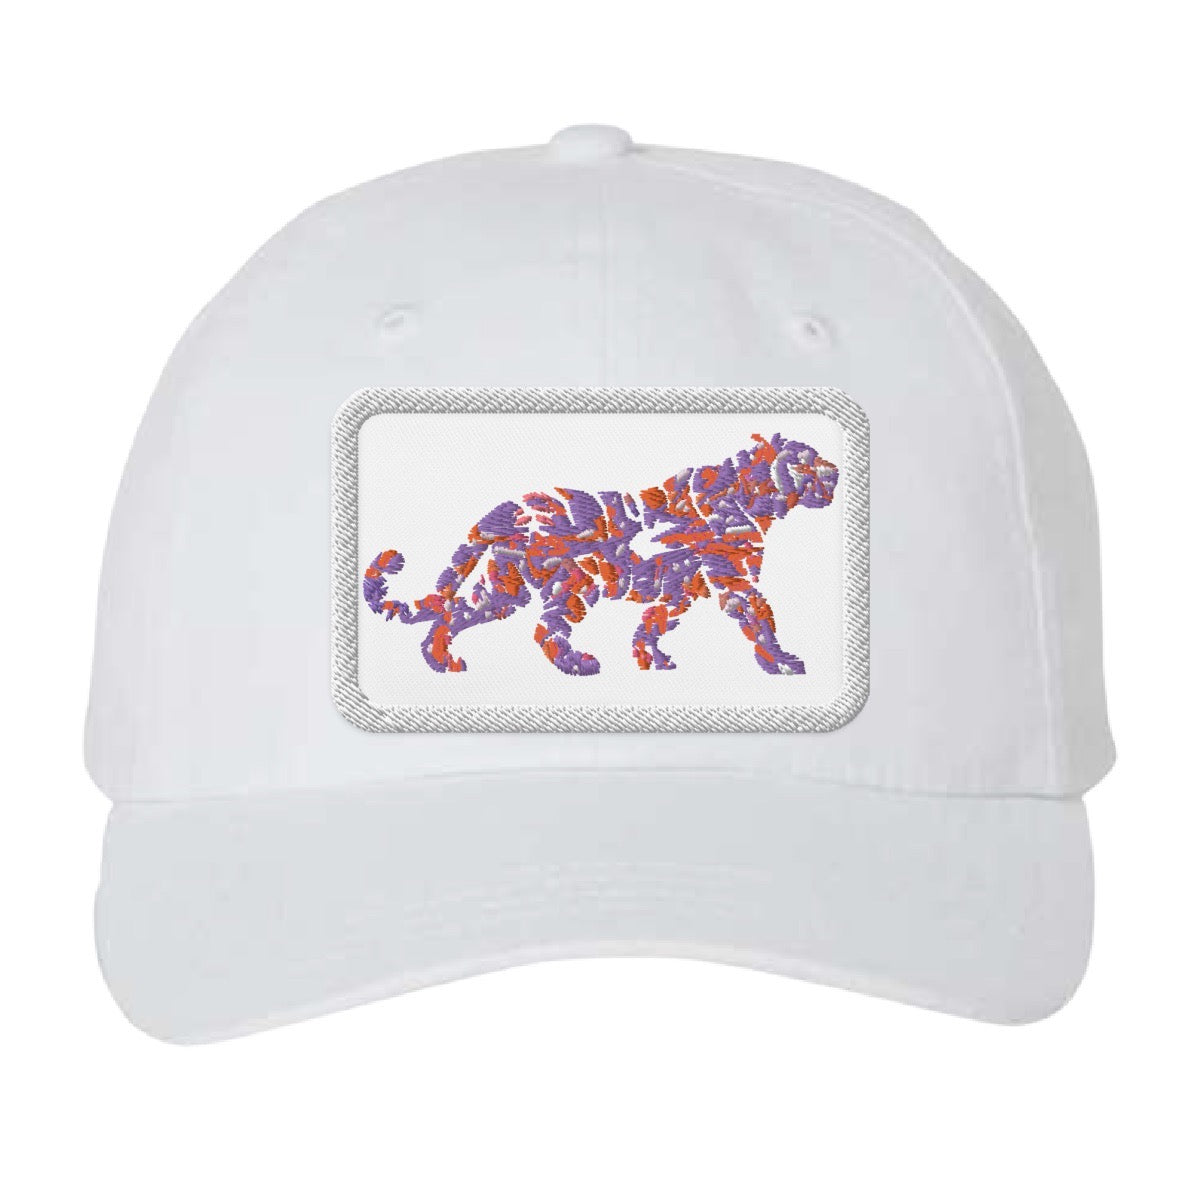 Tiger Ball Caps (2 styles)